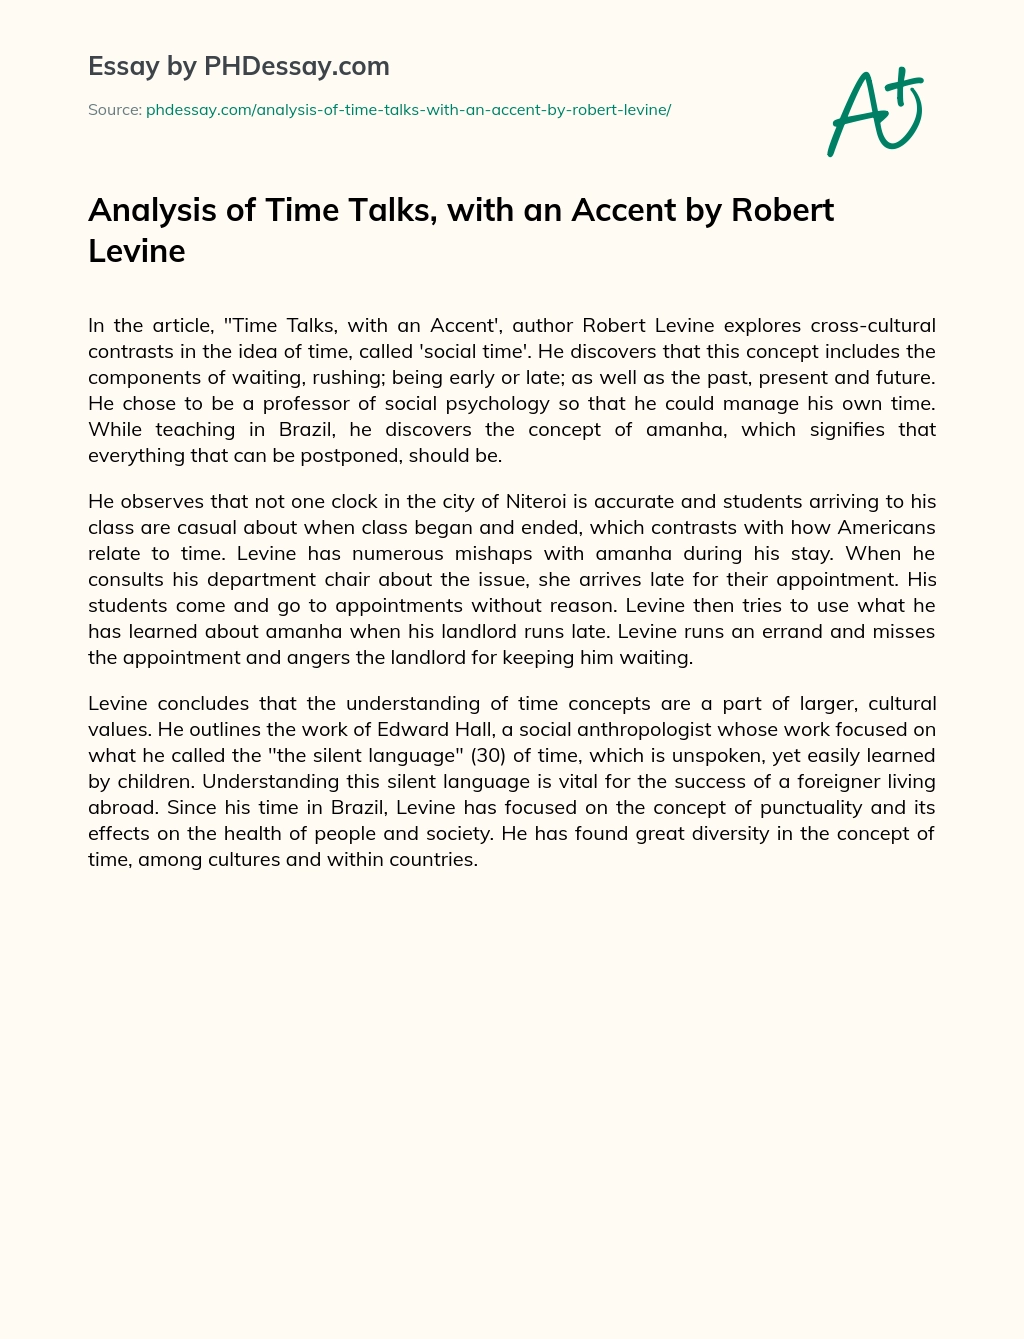 Analysis of Time Talks, with an Accent by Robert Levine essay